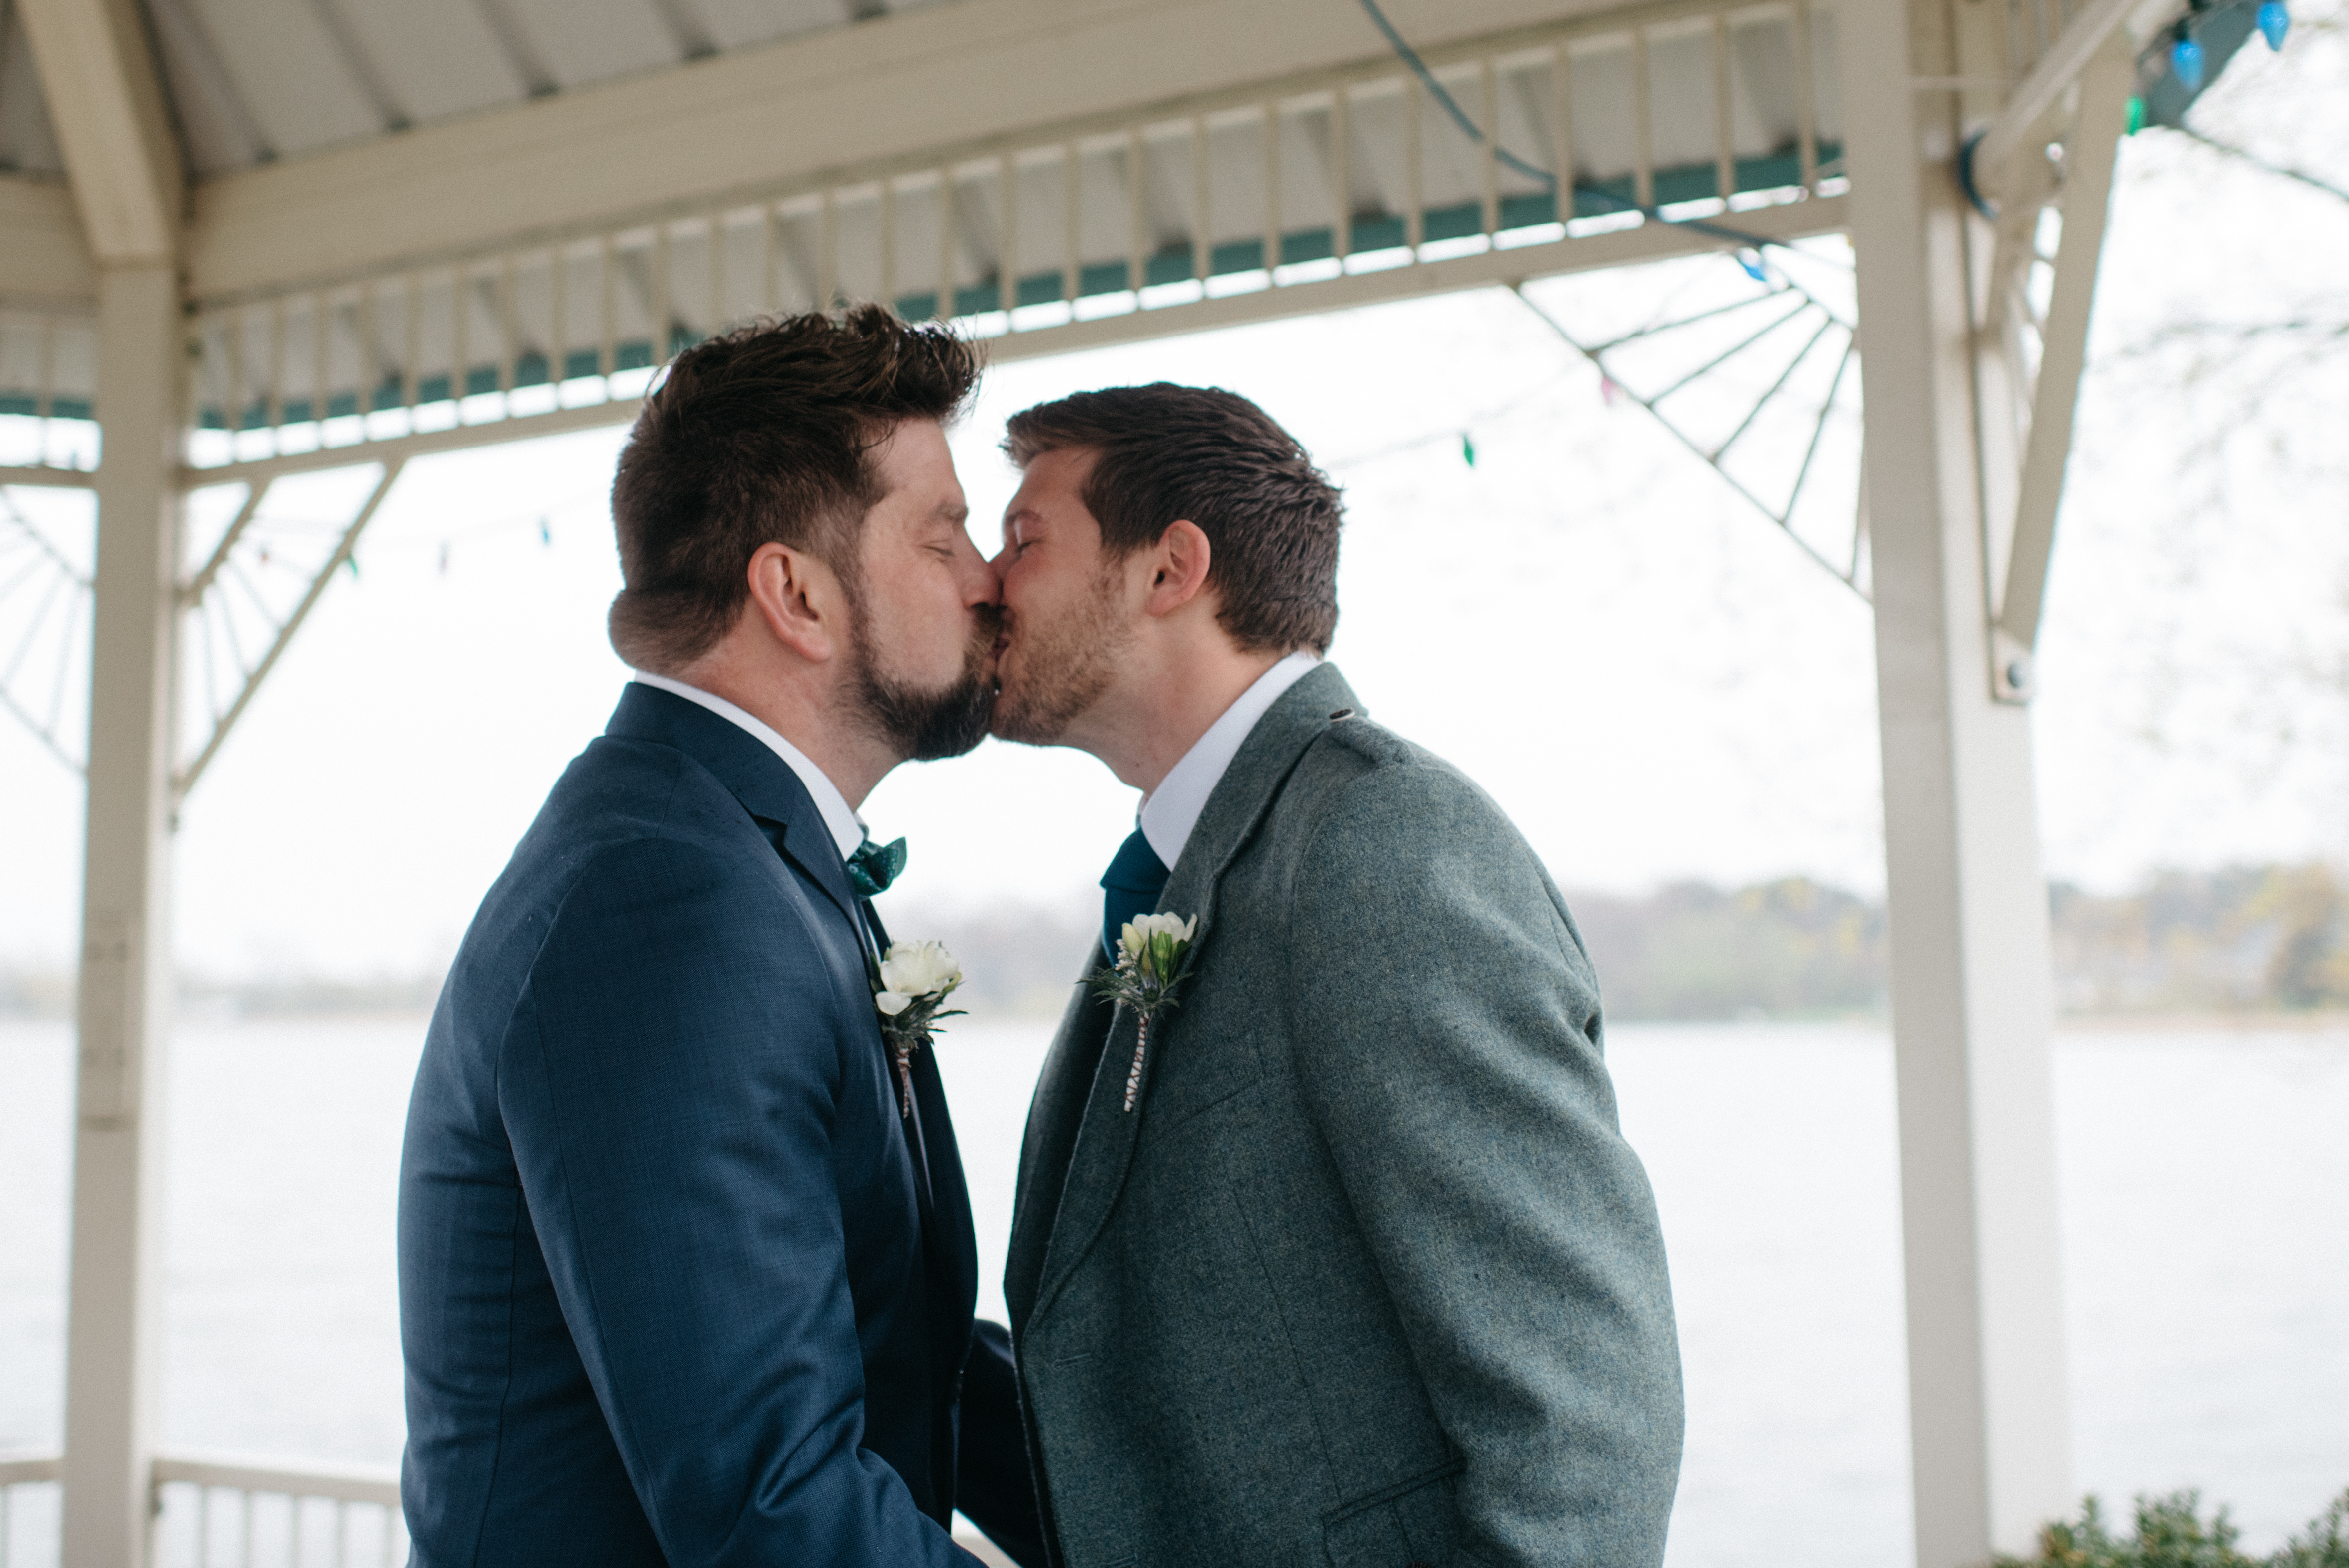 men share thier first married kiss at wade's bayou memorial park